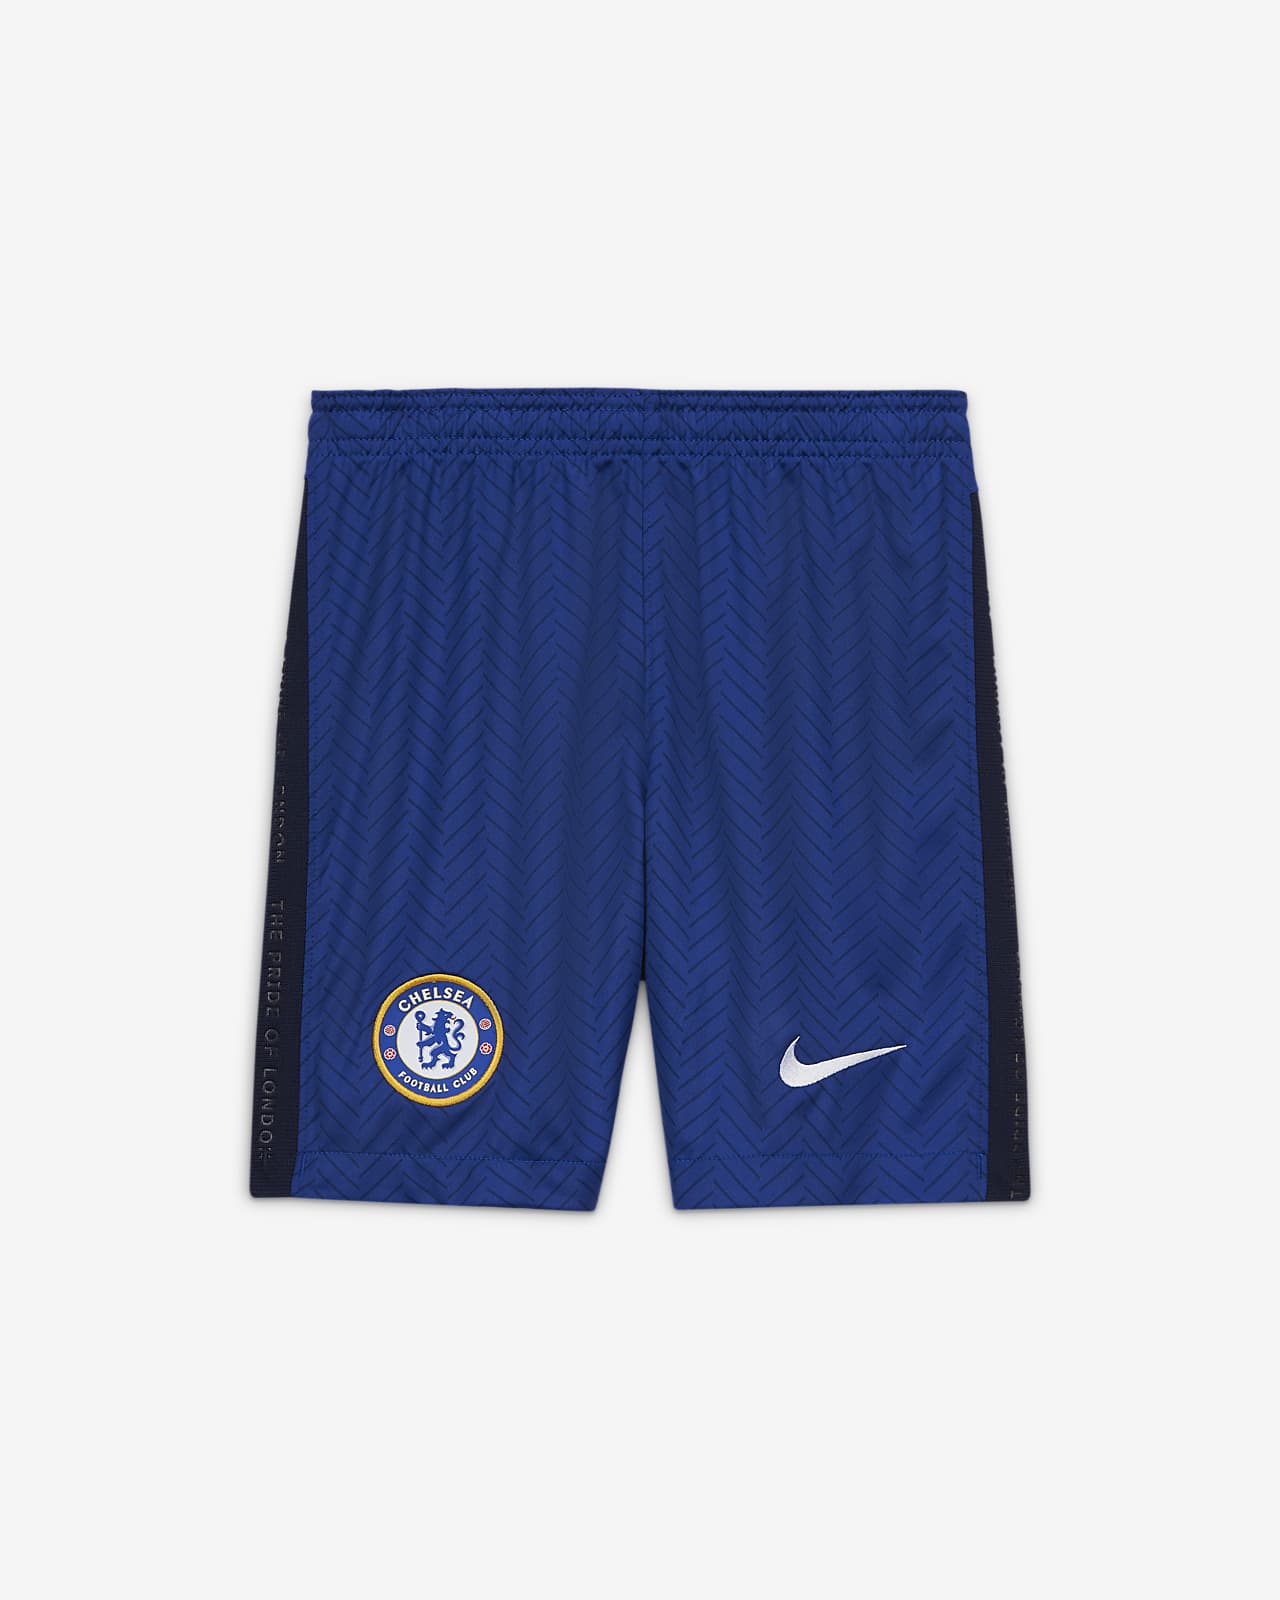 chelsea nike shorts - OFF 74% - Red-E Tech